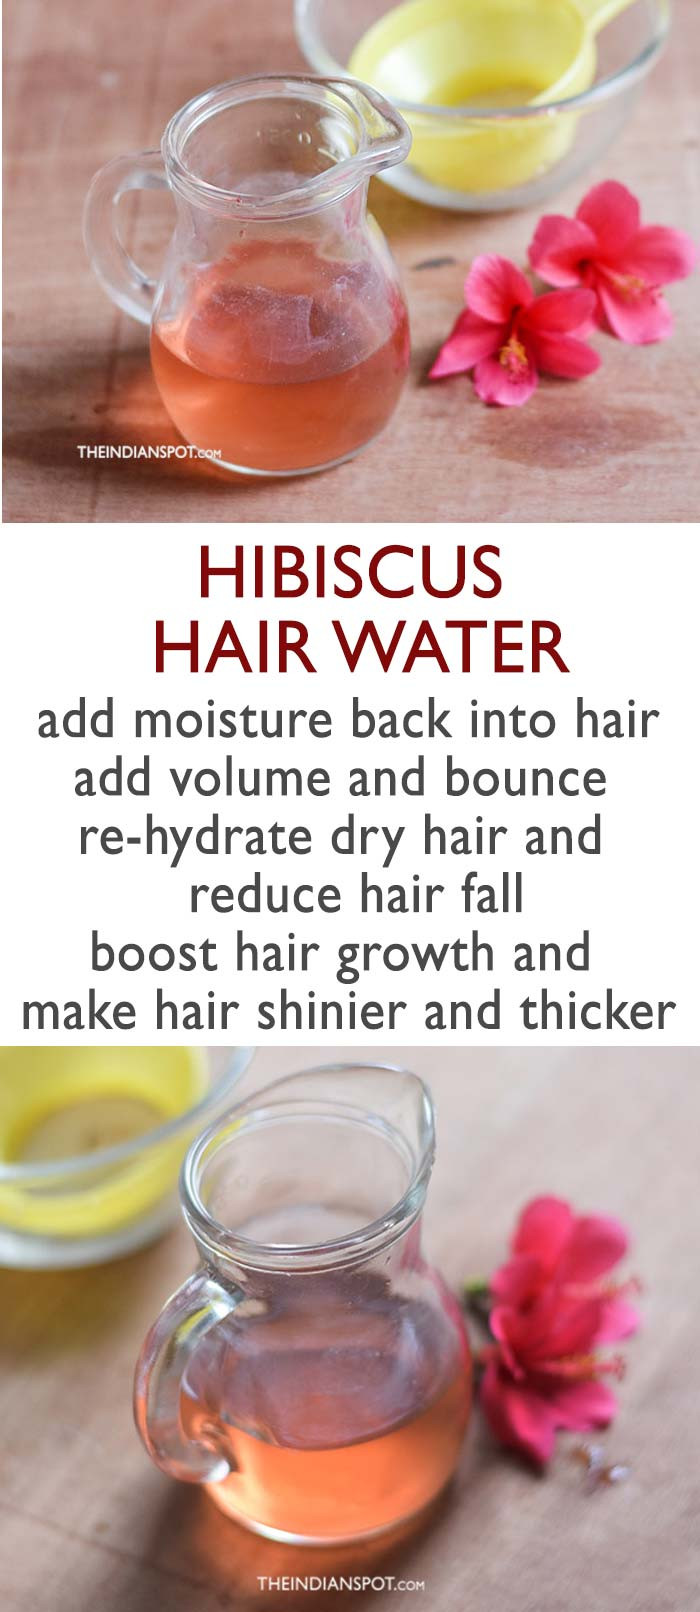 DIY Natural Hair Products
 Top 10 DIY NATURAL PRODUCTS FOR HAIR GROWTH THE INDIAN SPOT